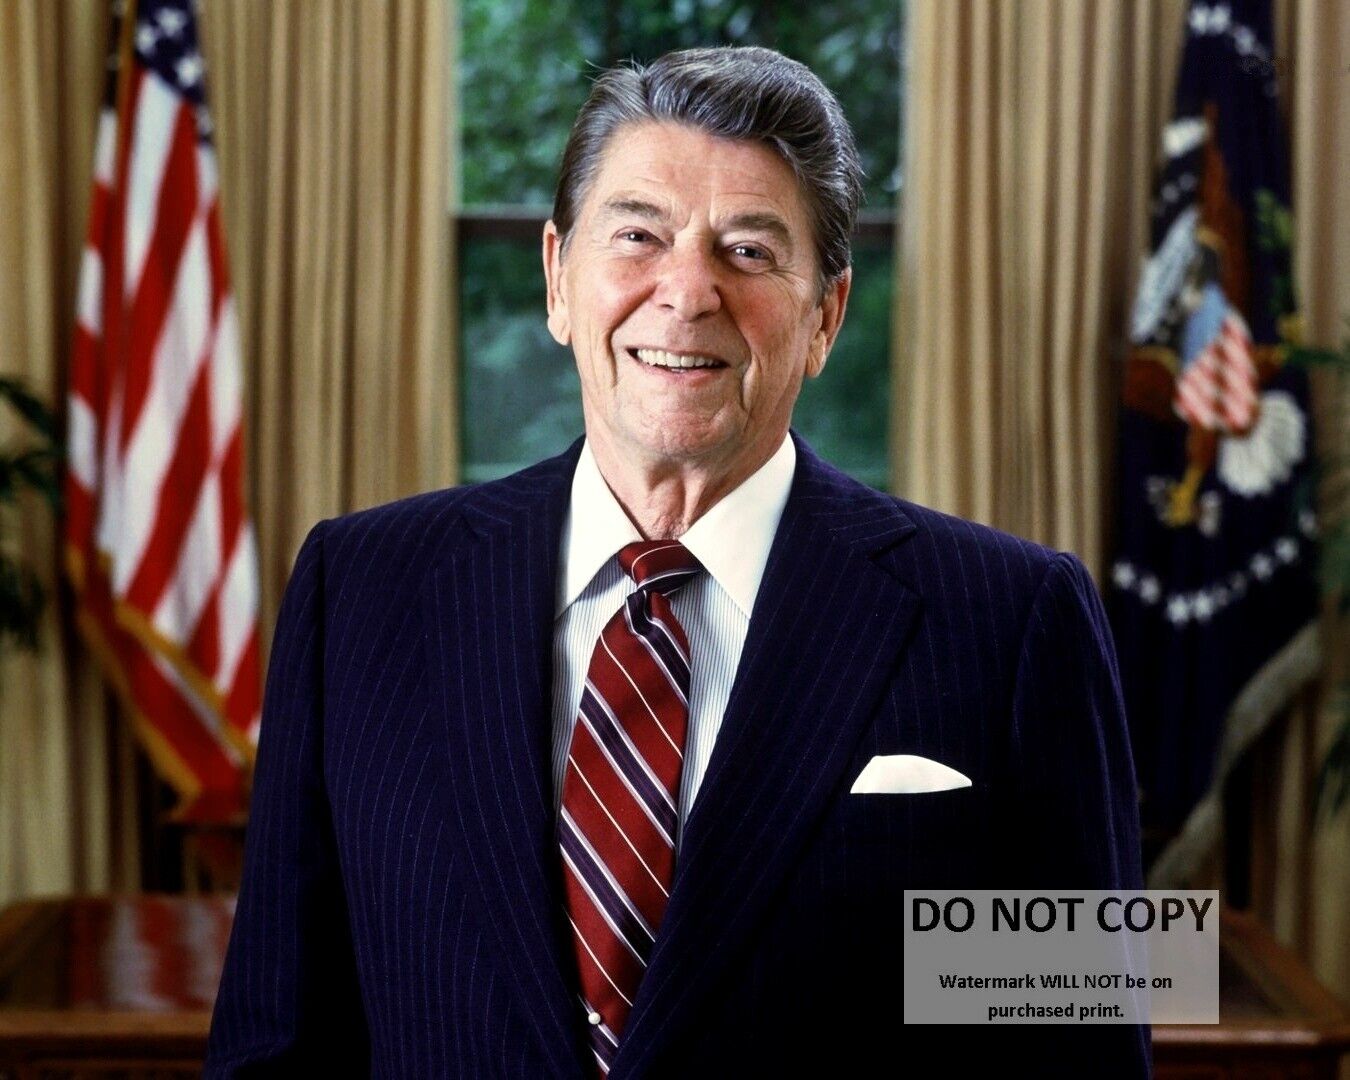 RONALD REAGAN 40TH PRESIDENT OF THE UNITED STATES - 8X10 PHOTO (RT783)